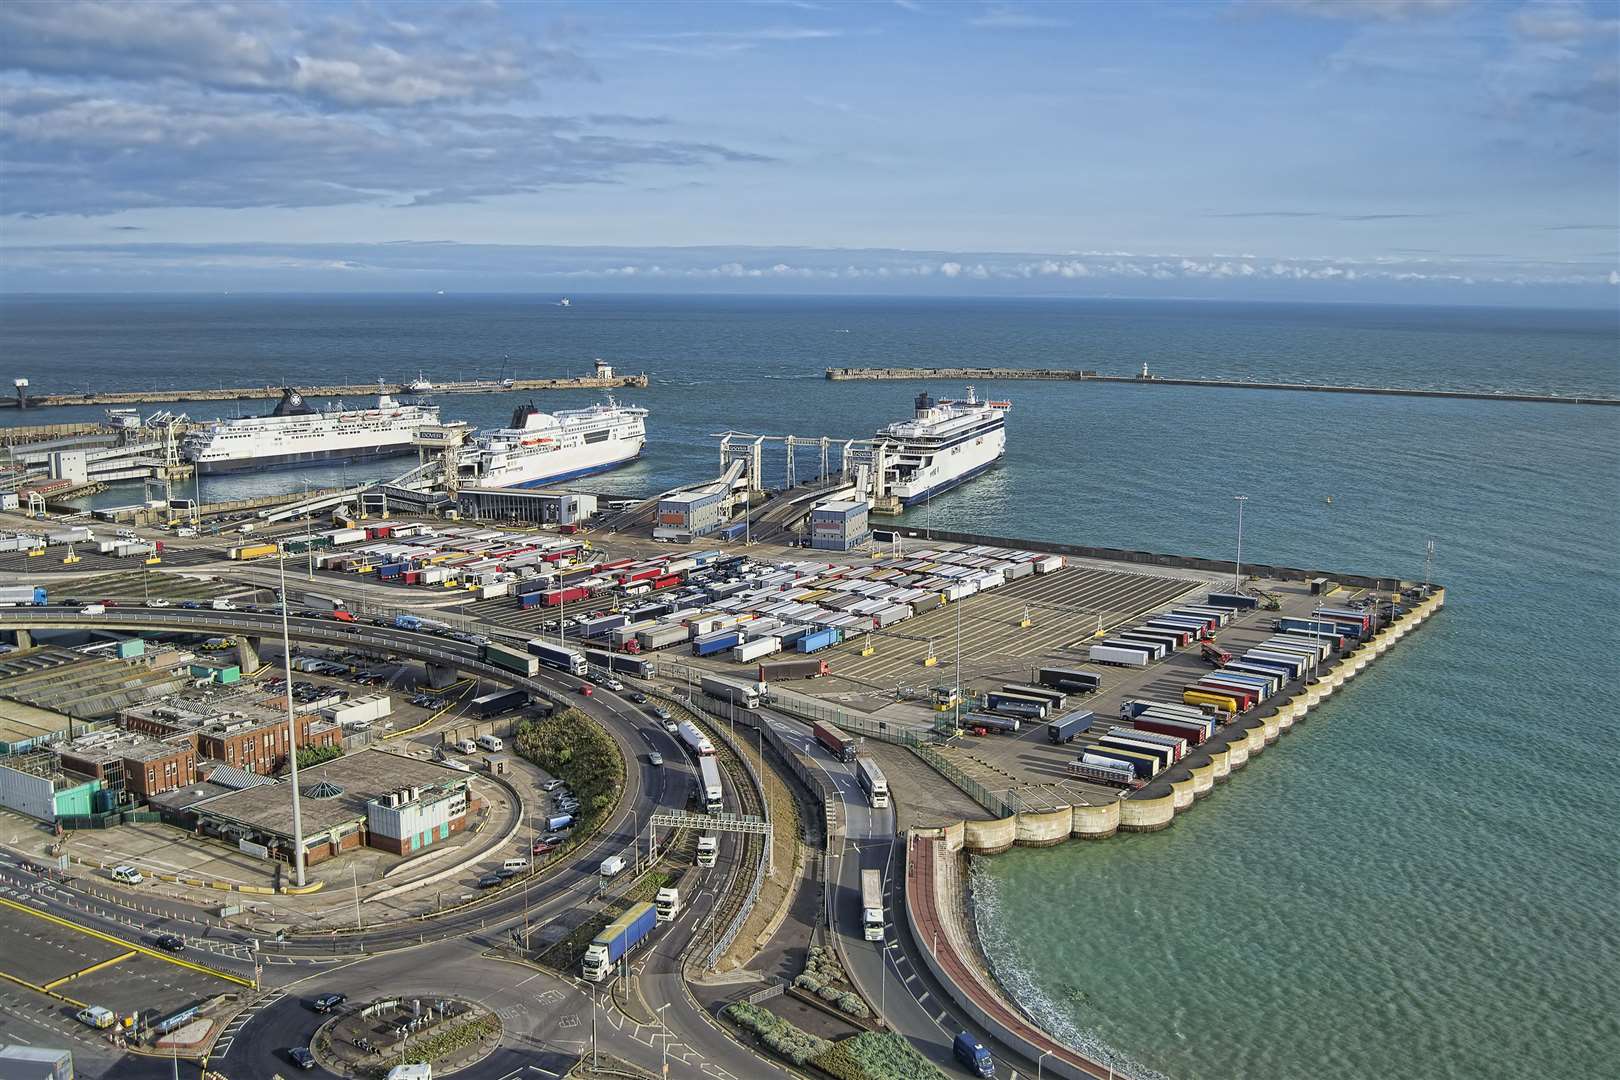 The cocaine was found in a shipment at the Port of Dover in September 2020